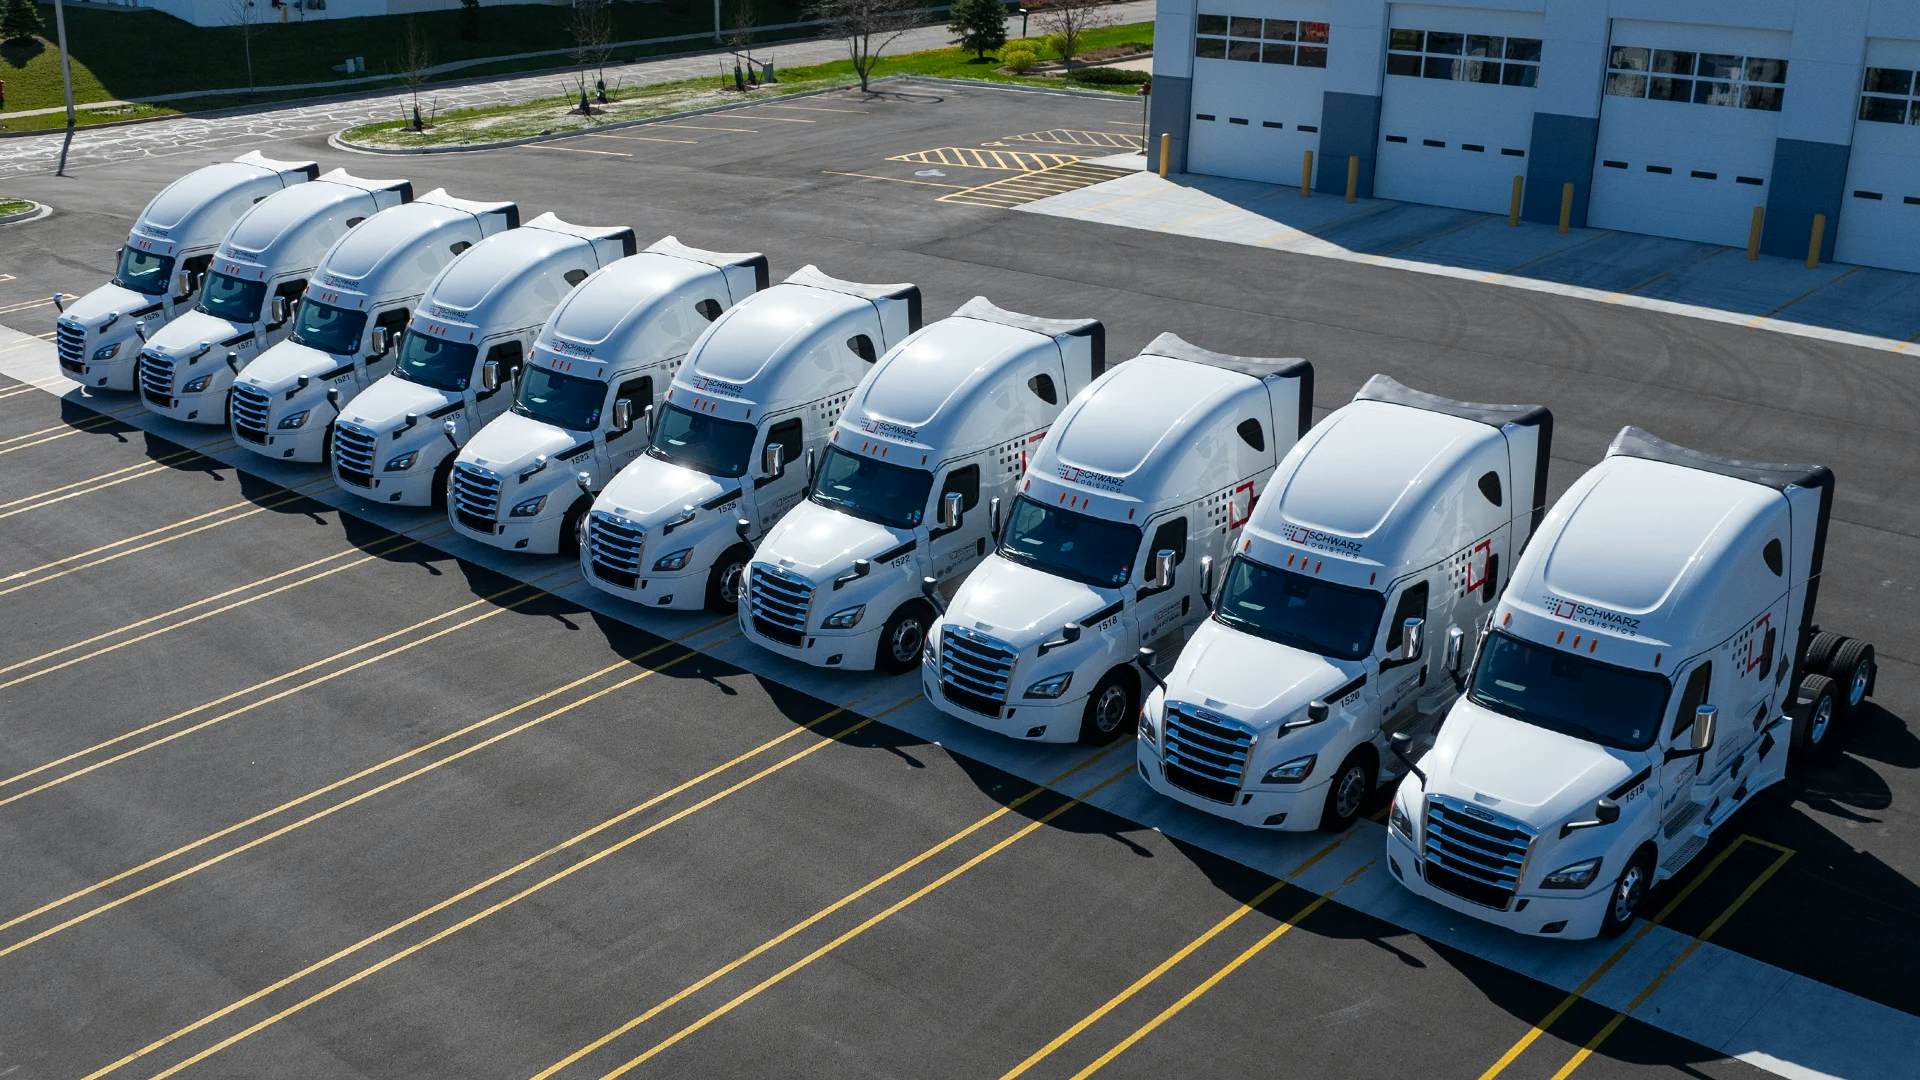 An aerial view of a fleet of commercial trucks neatly parked in a large parking area.